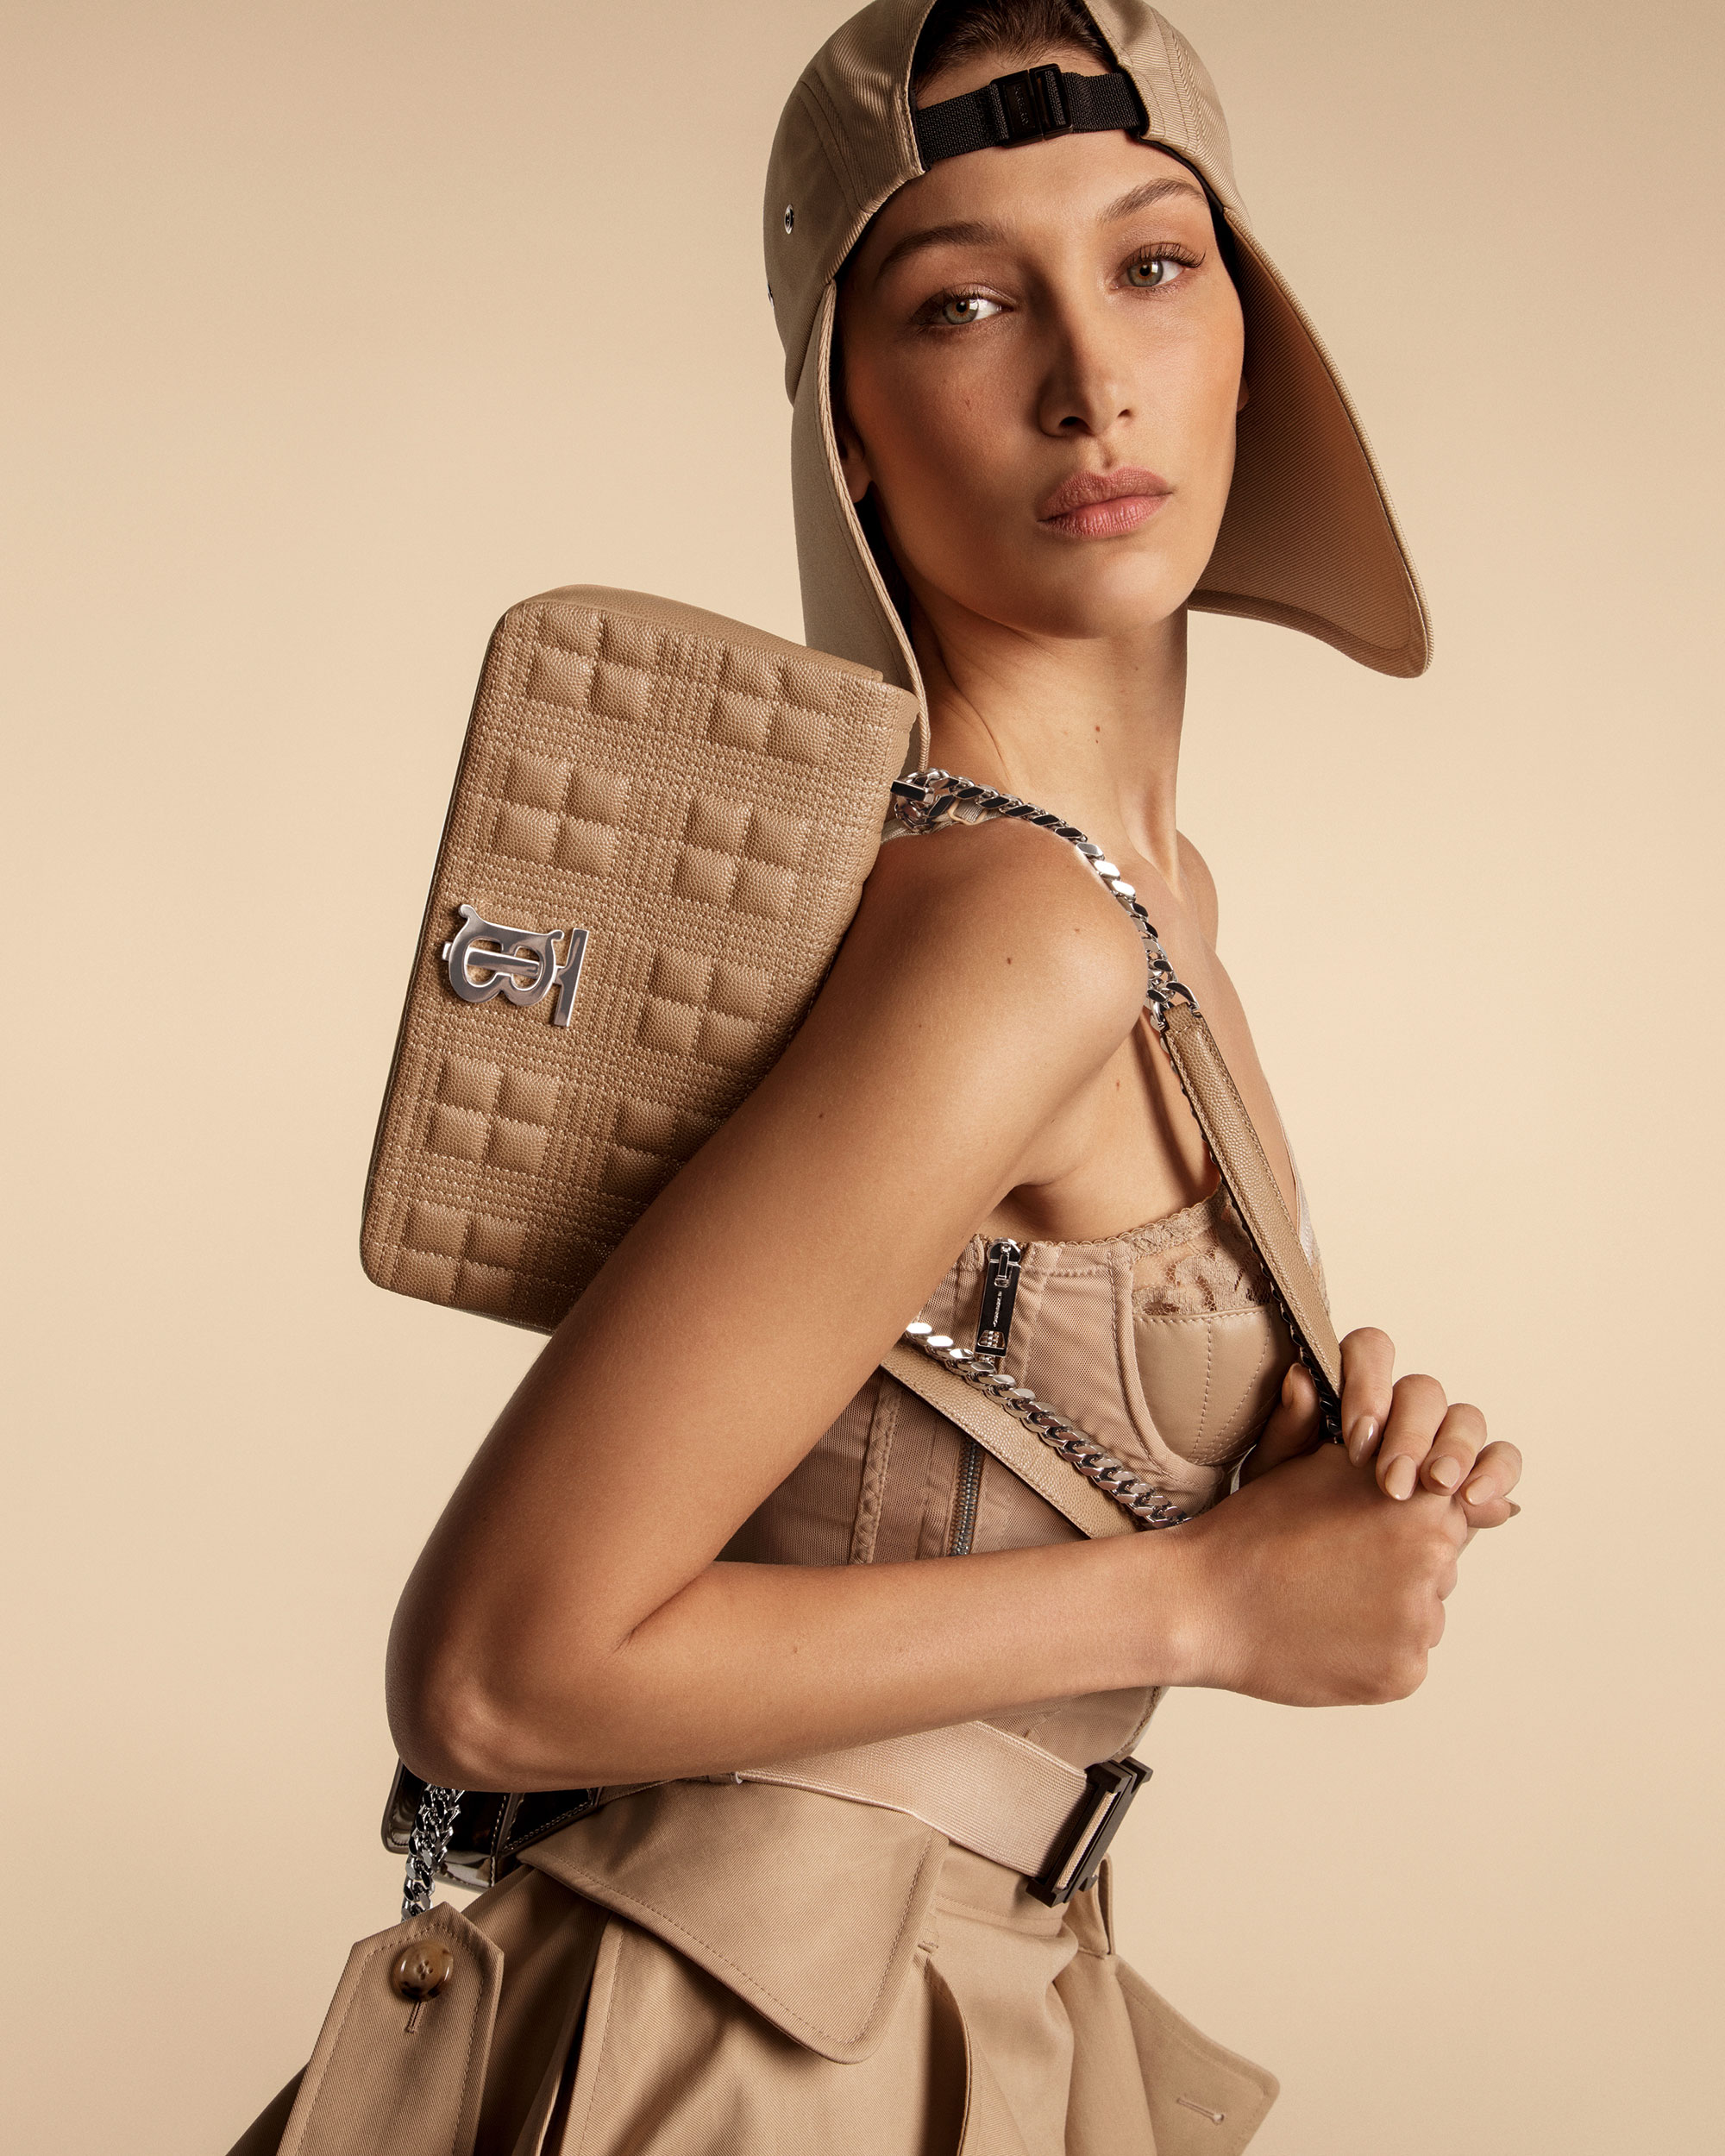 Burberry SS2020 Campaign Starring Kendall Jenner and More Stars